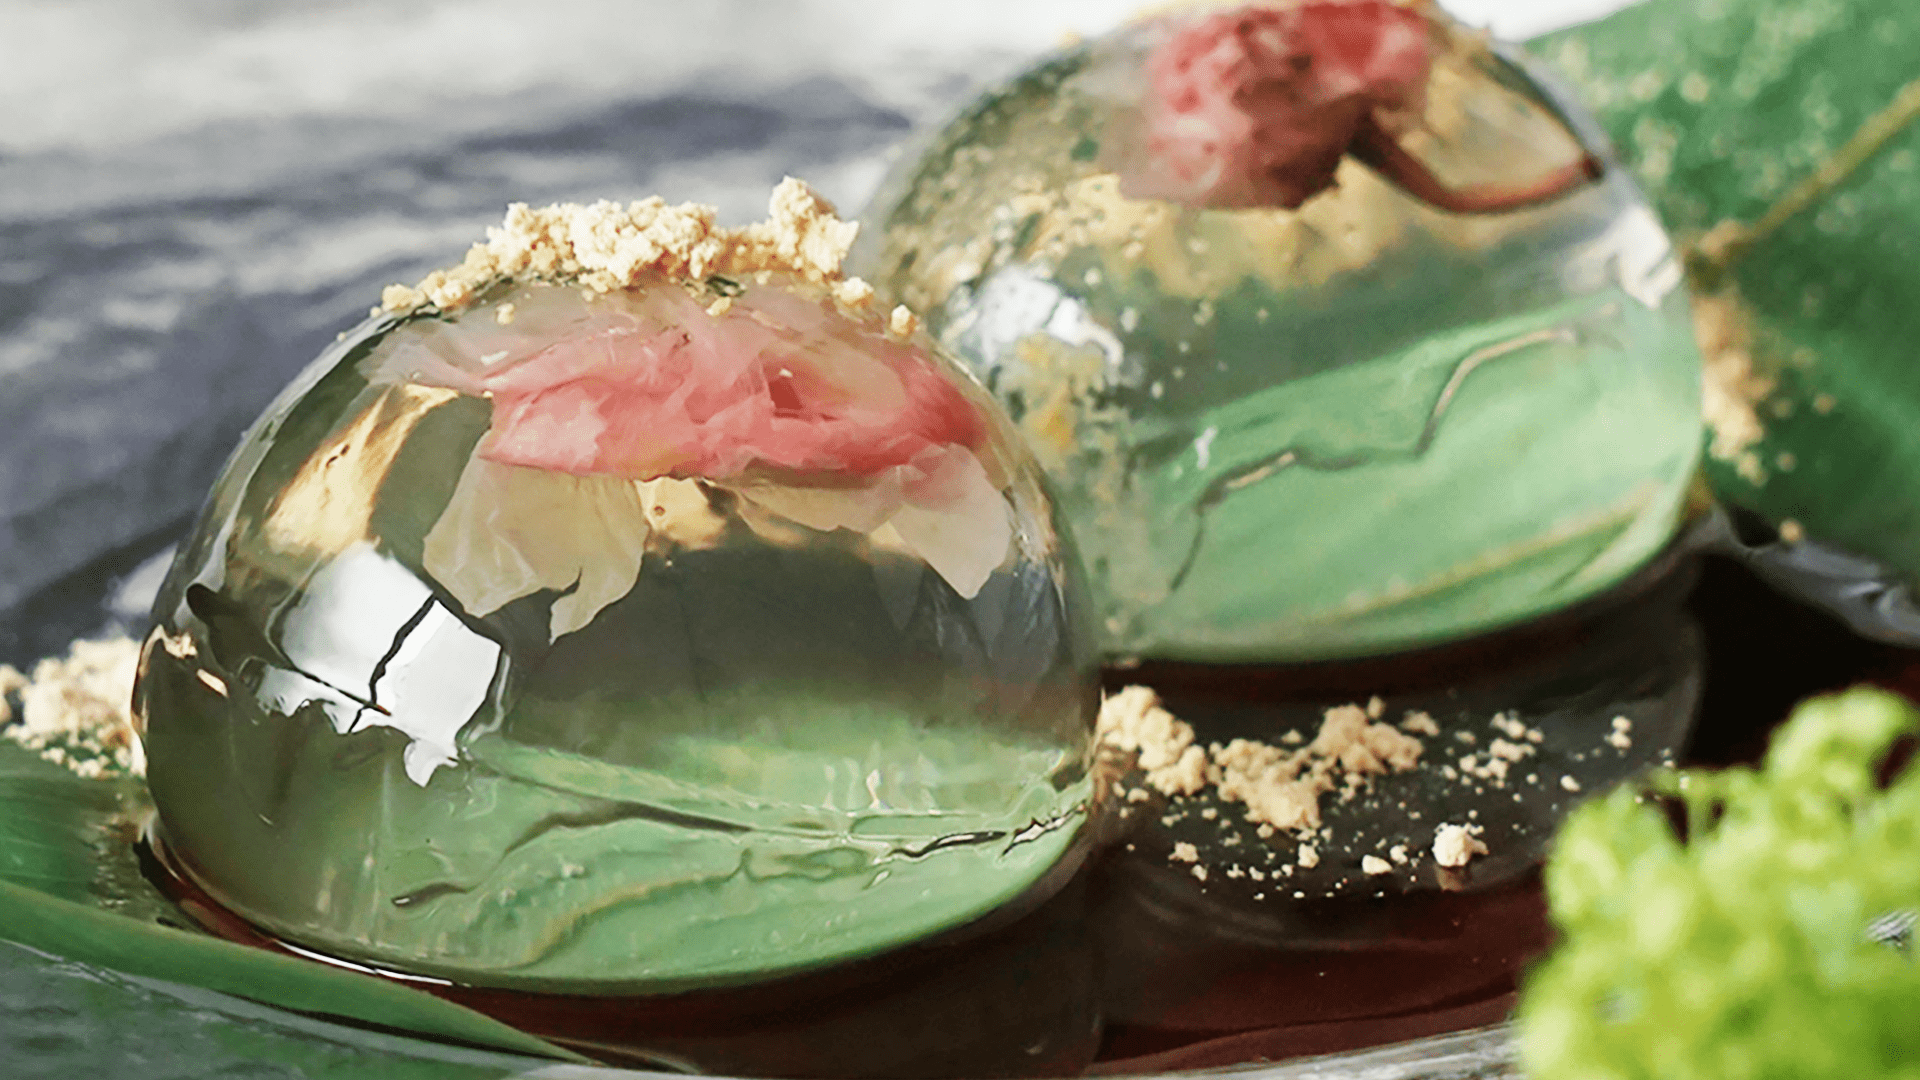 Ingredients for raindrop cake - holdenmaui